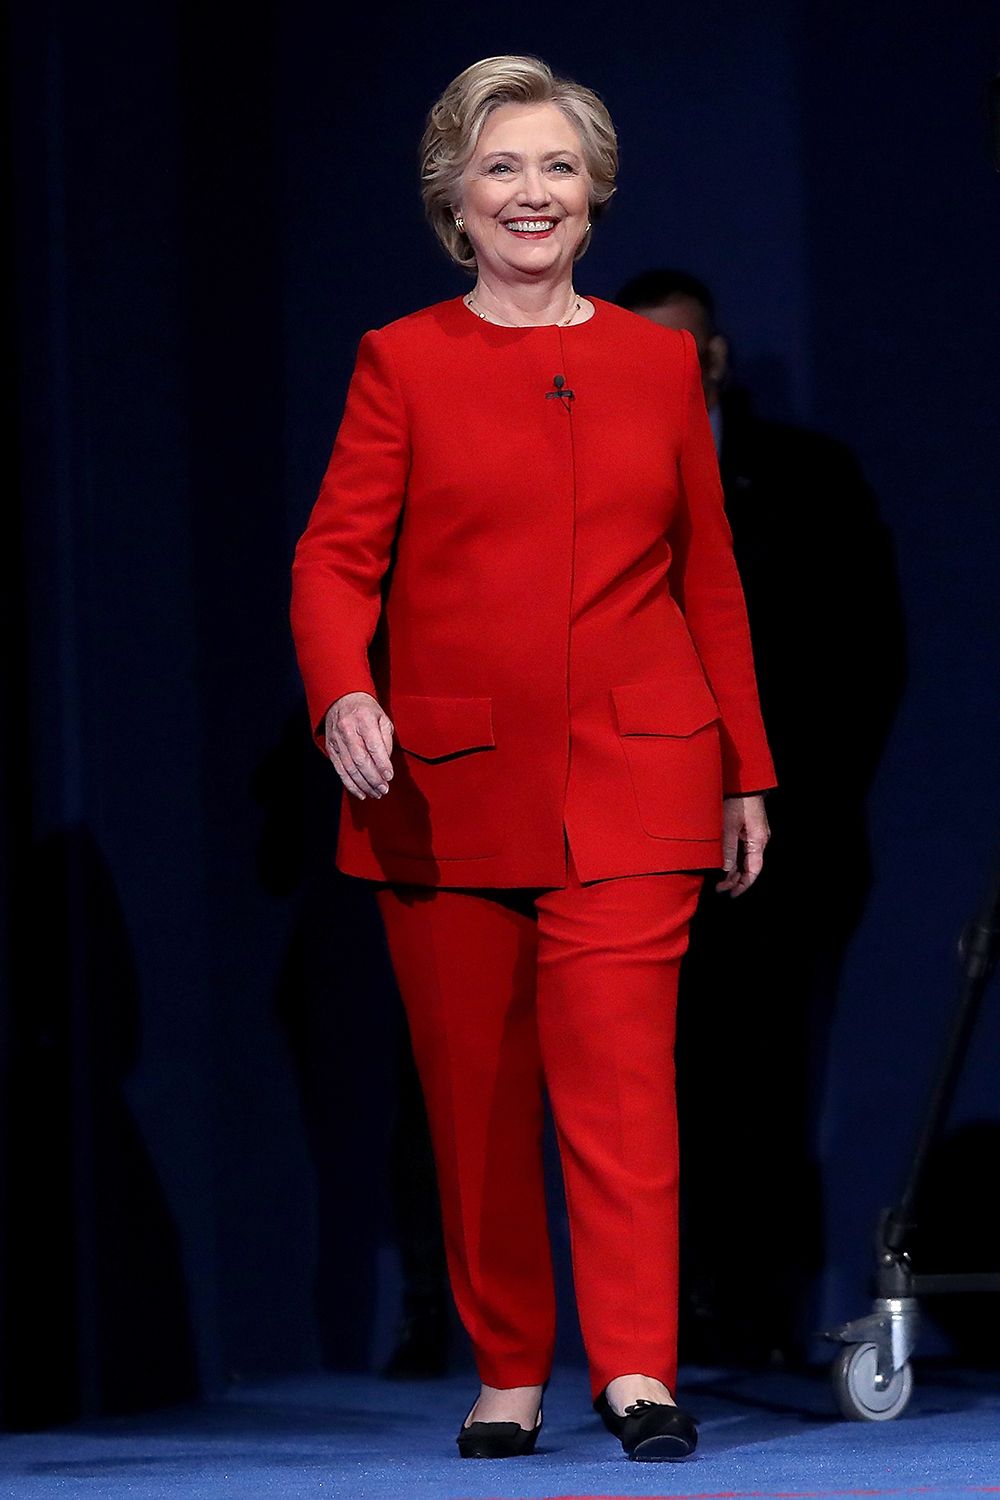 Hillary Clinton Shares Why She Decided to Start Wearing Pantsuits